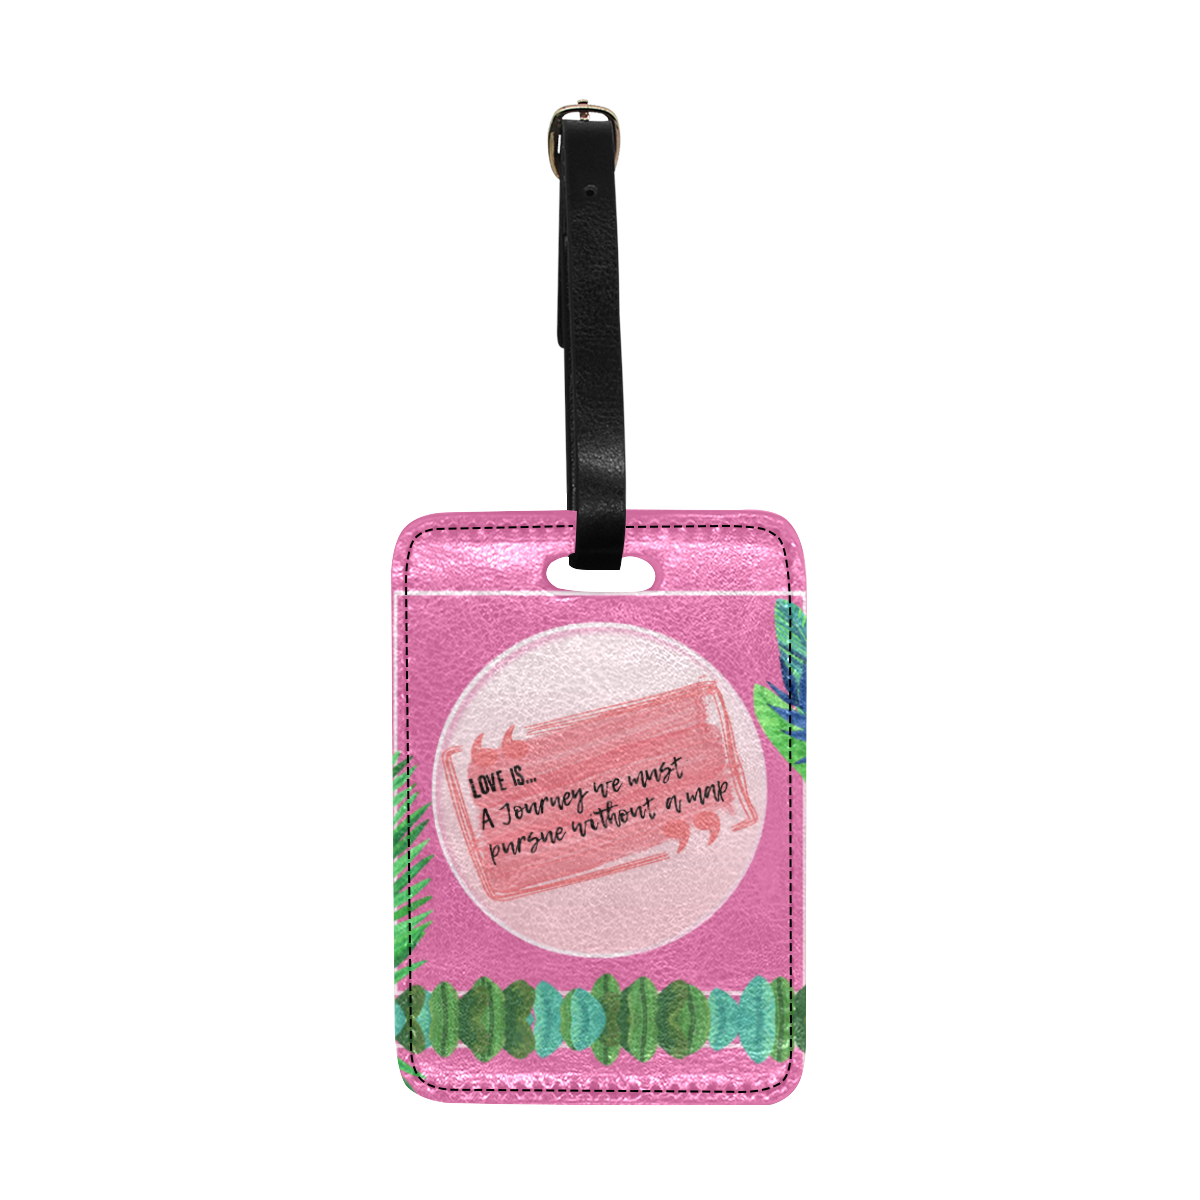 Lots of Love Journey Luggage Tag